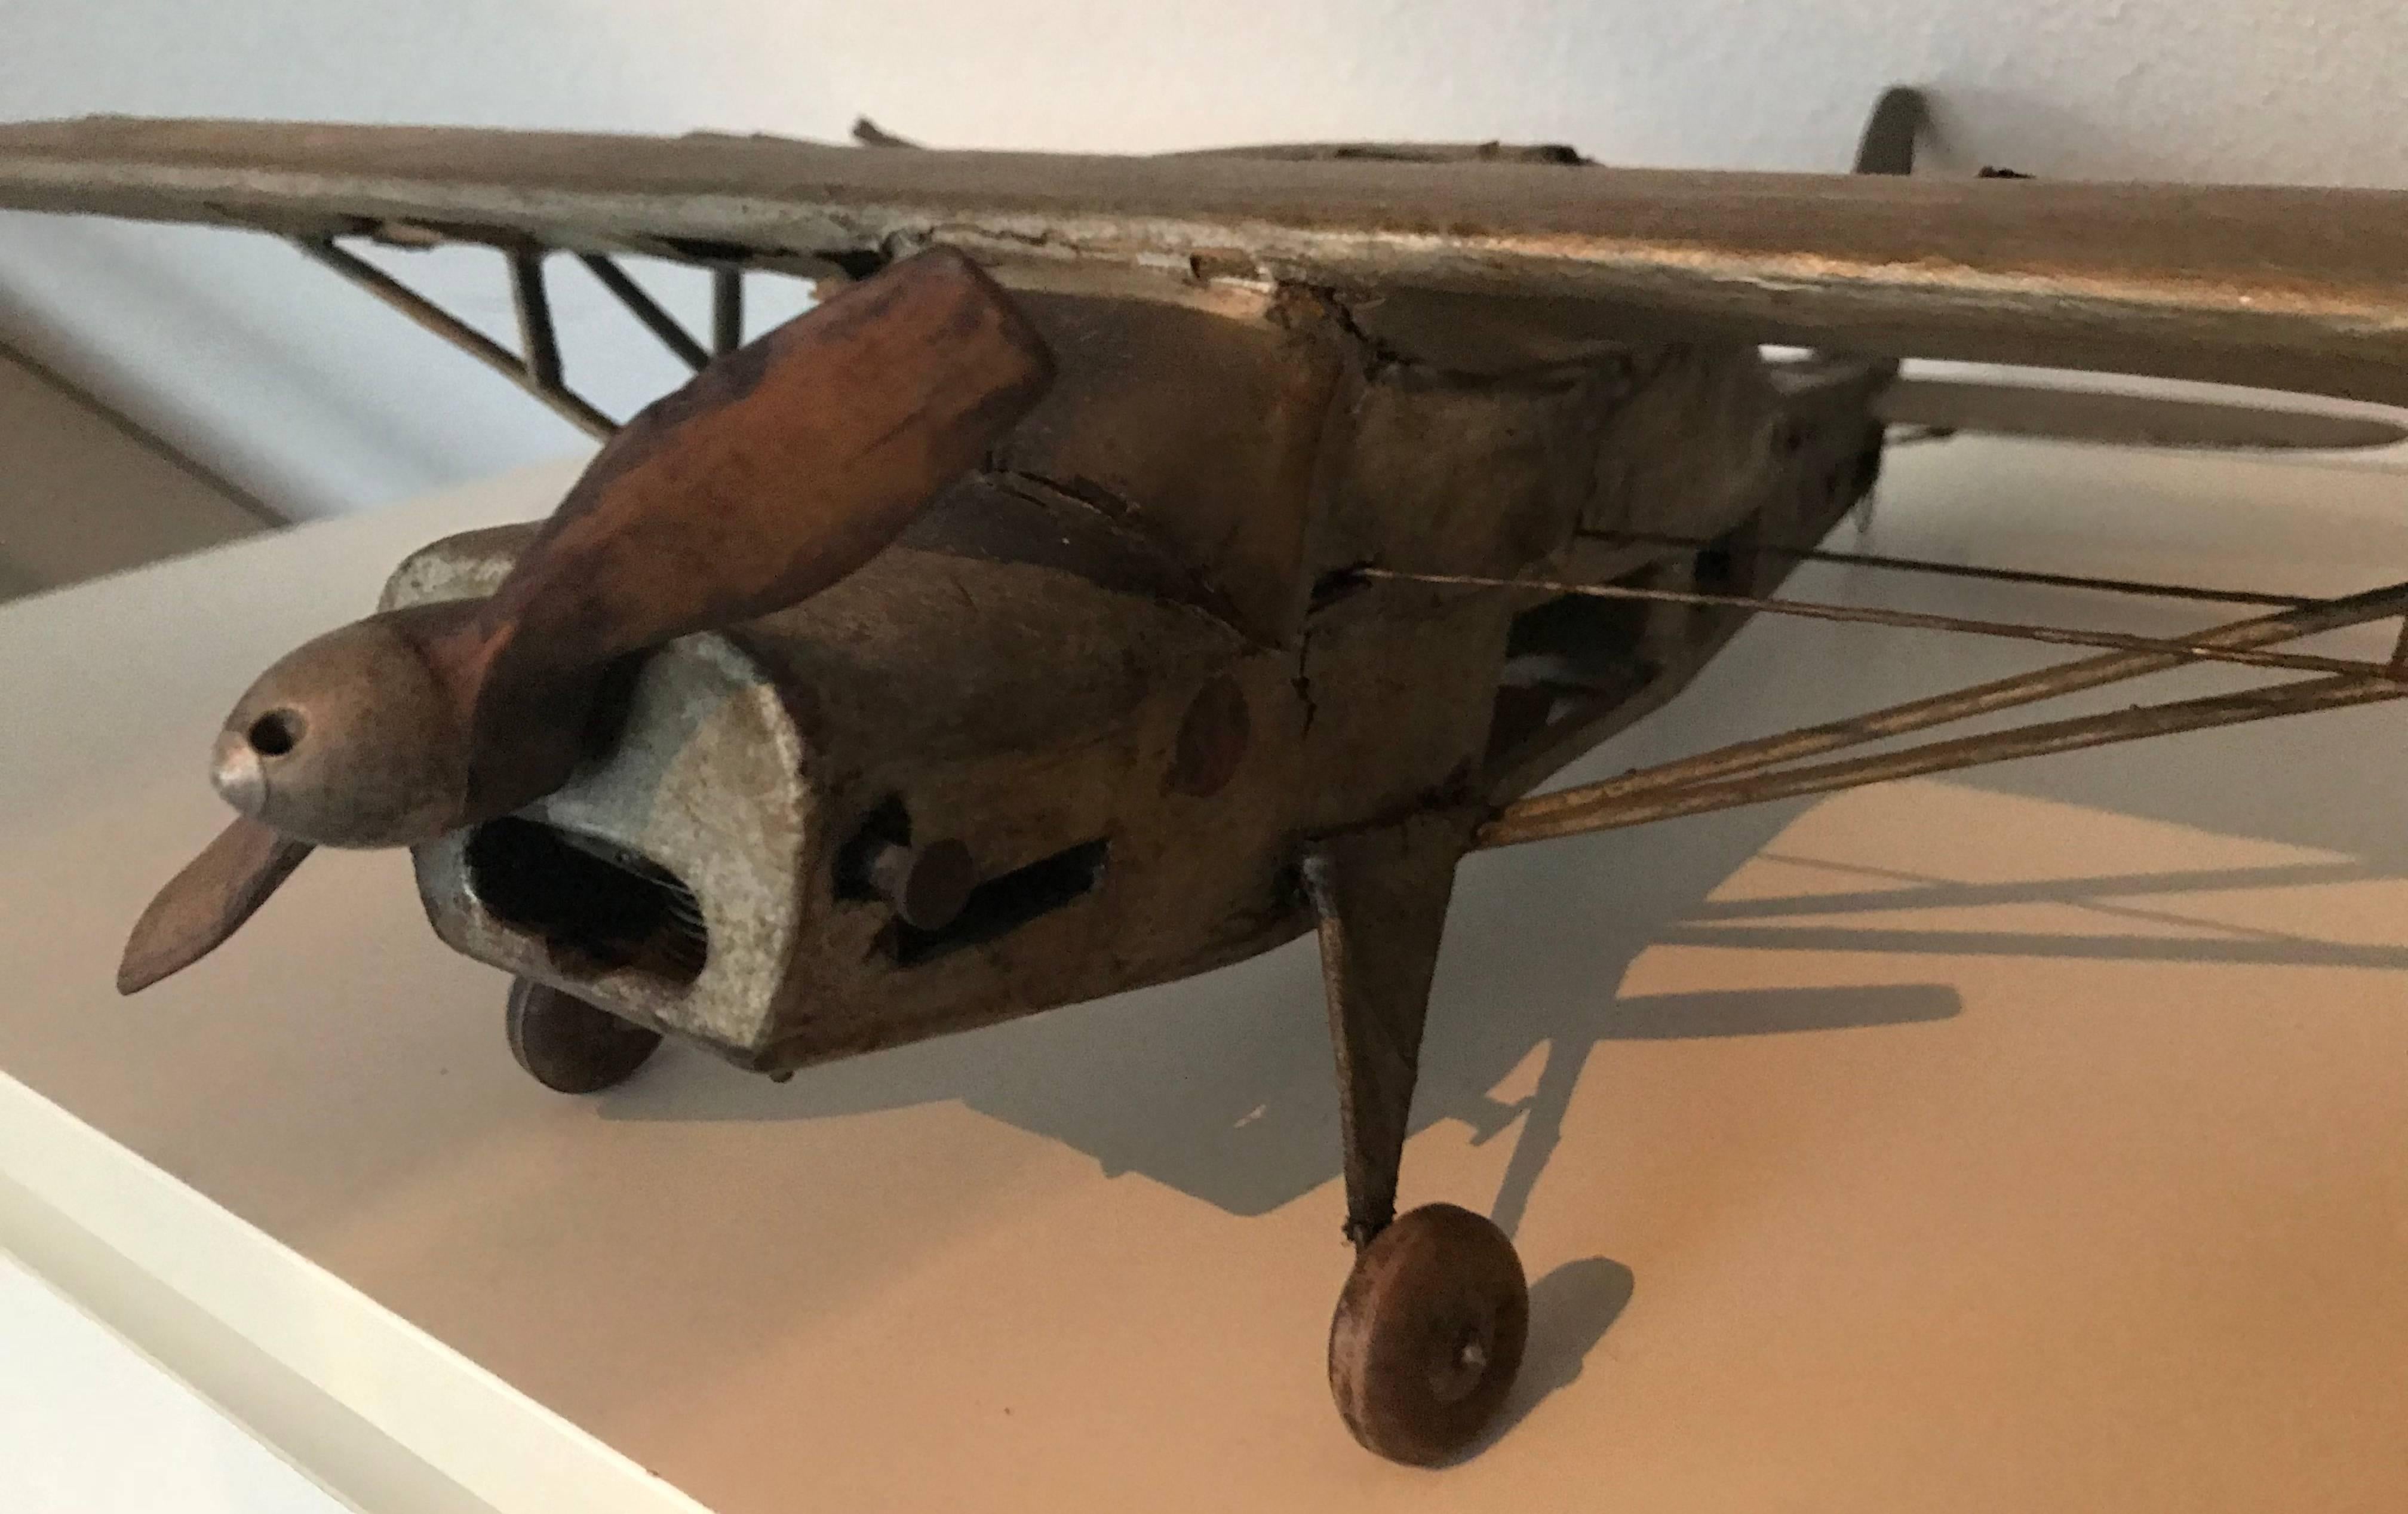 English Airplane Model For Sale